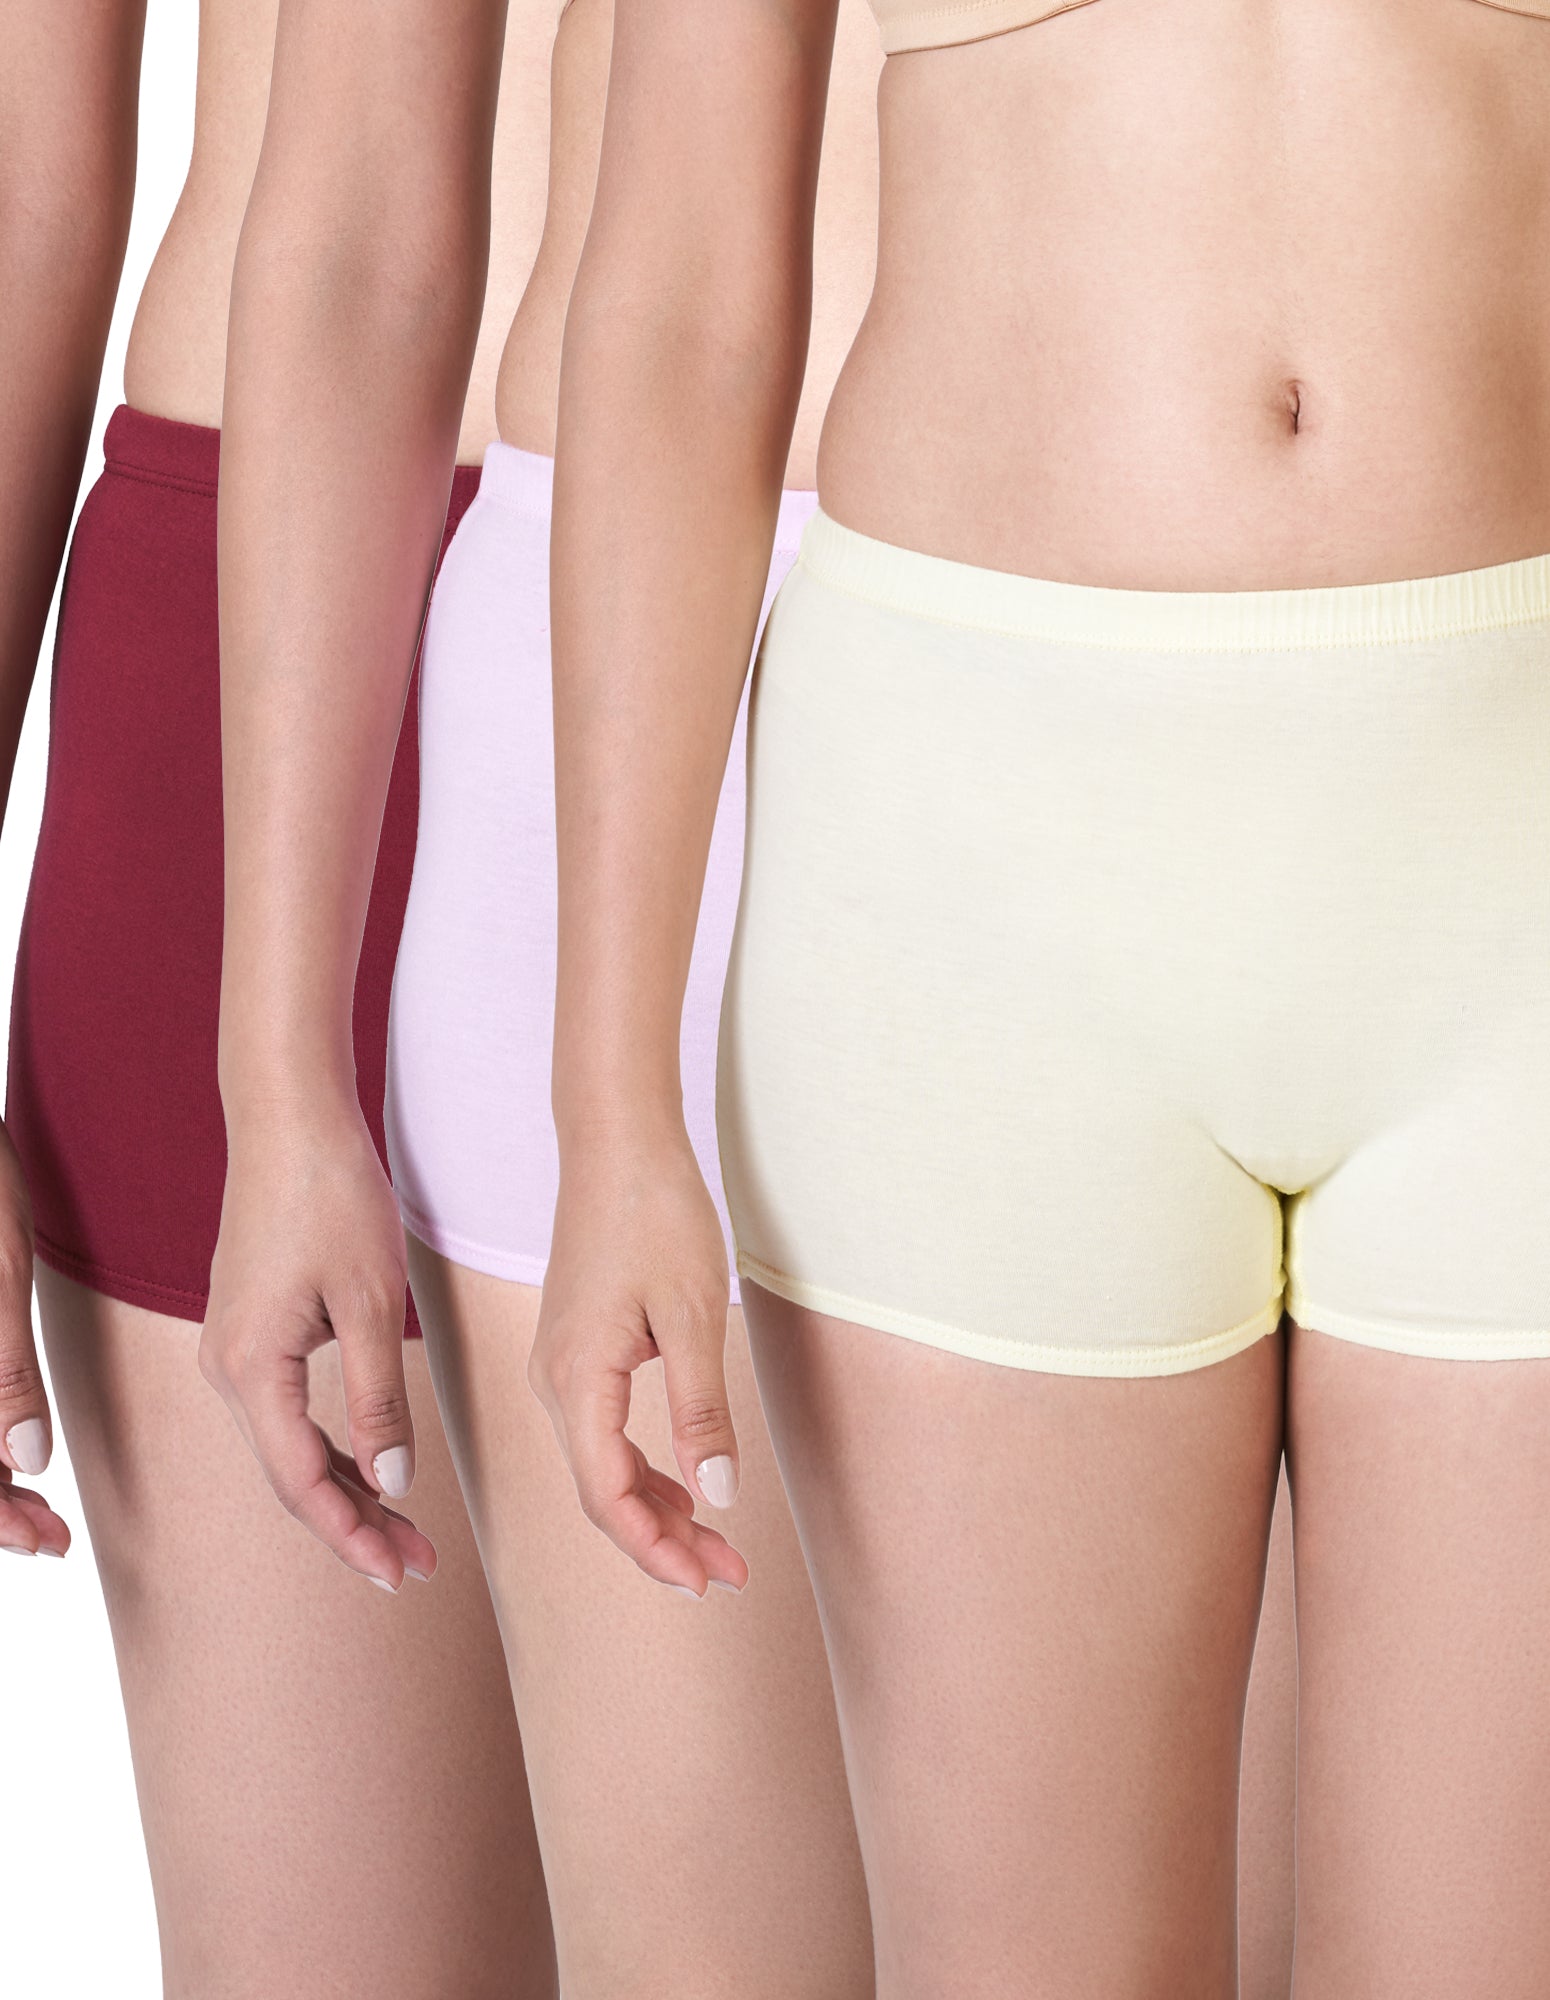 blossom-plain shorty(pack of 3)-assorted1-shorts-panty